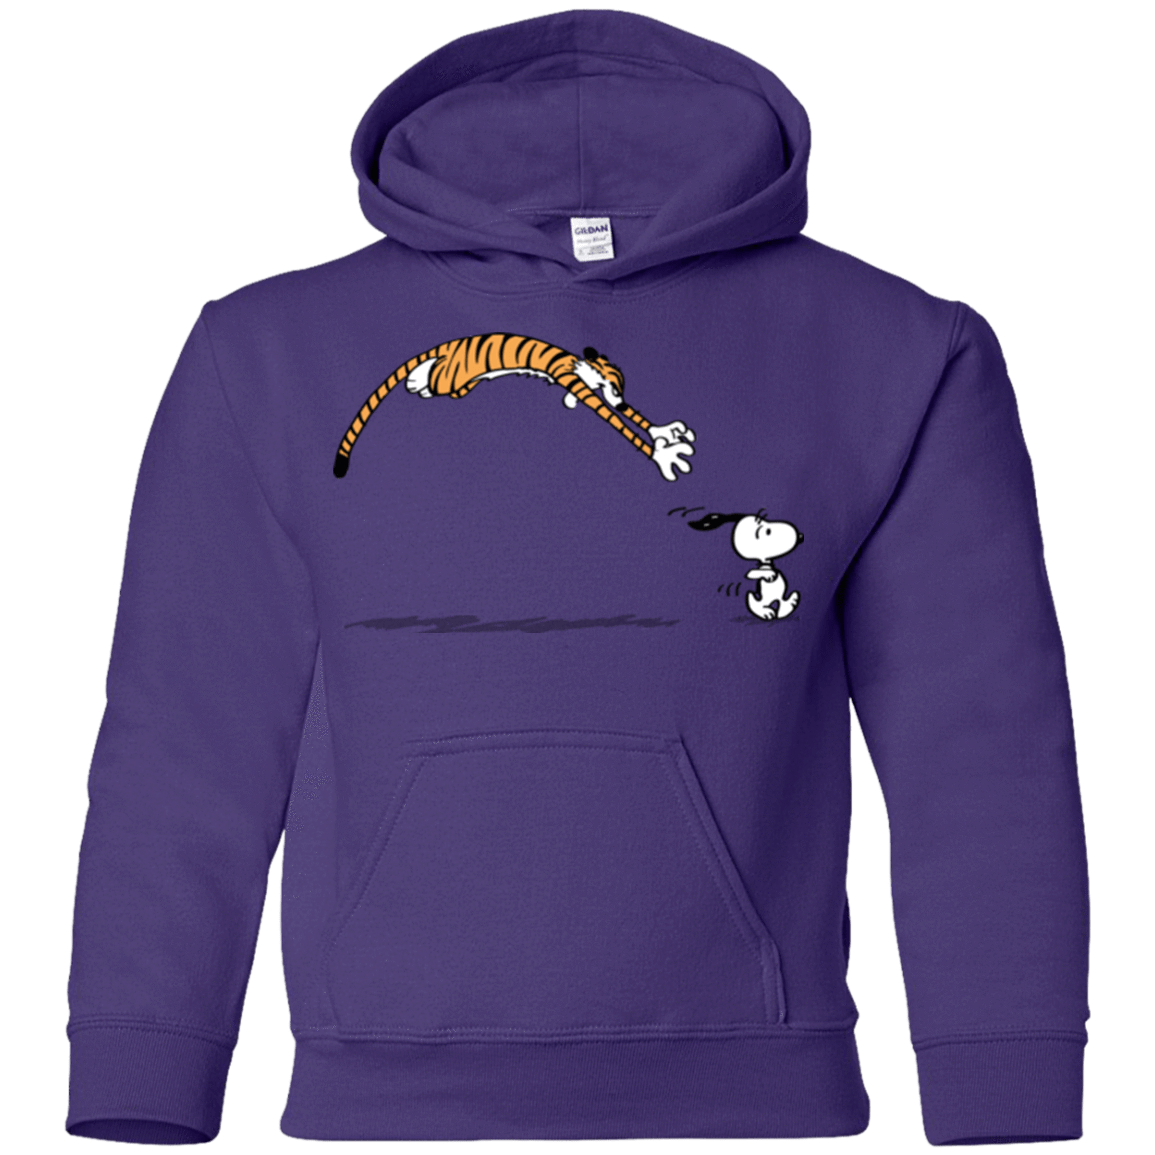 Pounce Youth Hoodie